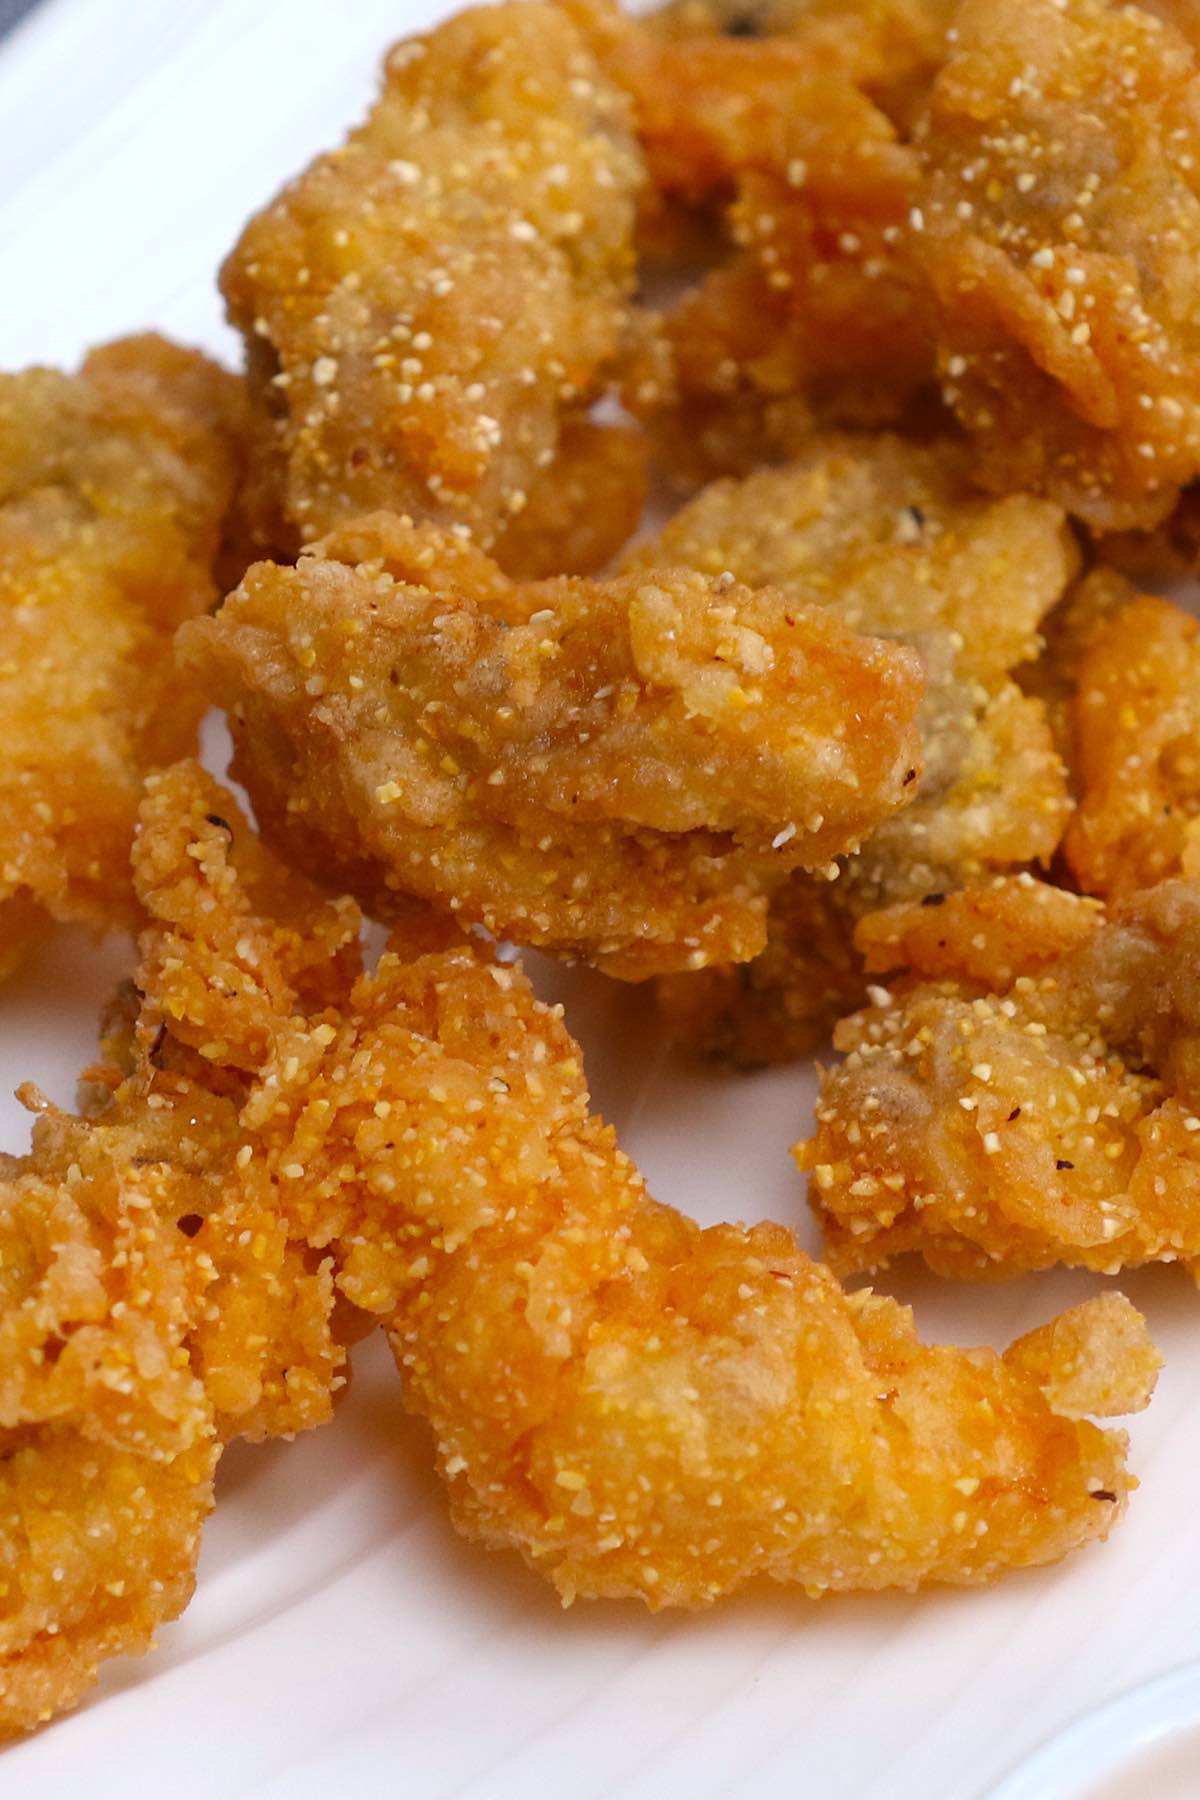 Whether you’re looking for a simple fried oyster recipe or want to live on the edge and spice things up with southern flare, you will not be disappointed with these tips and tricks to the perfect fried oysters!